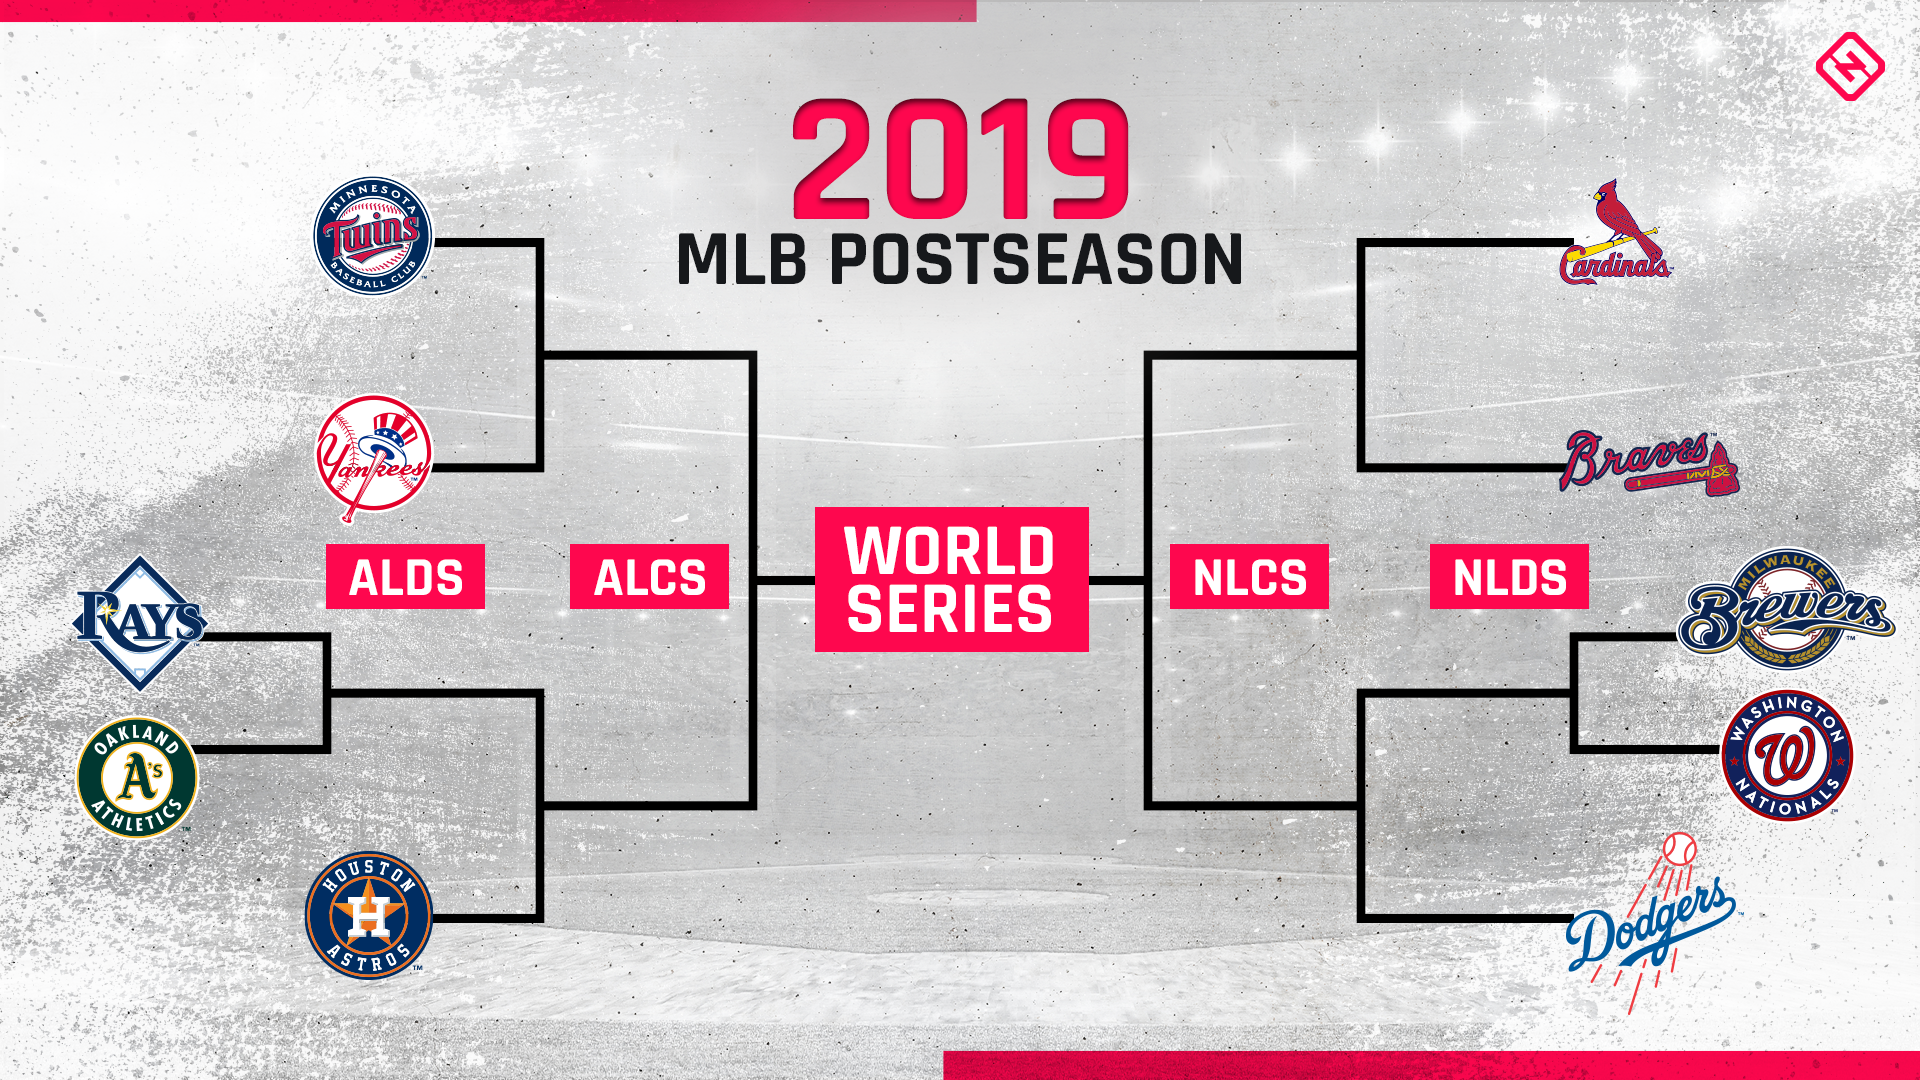 MLB playoffs schedule 2019: Full bracket, dates, times, TV channels for ALCS, NLCS | Sporting News